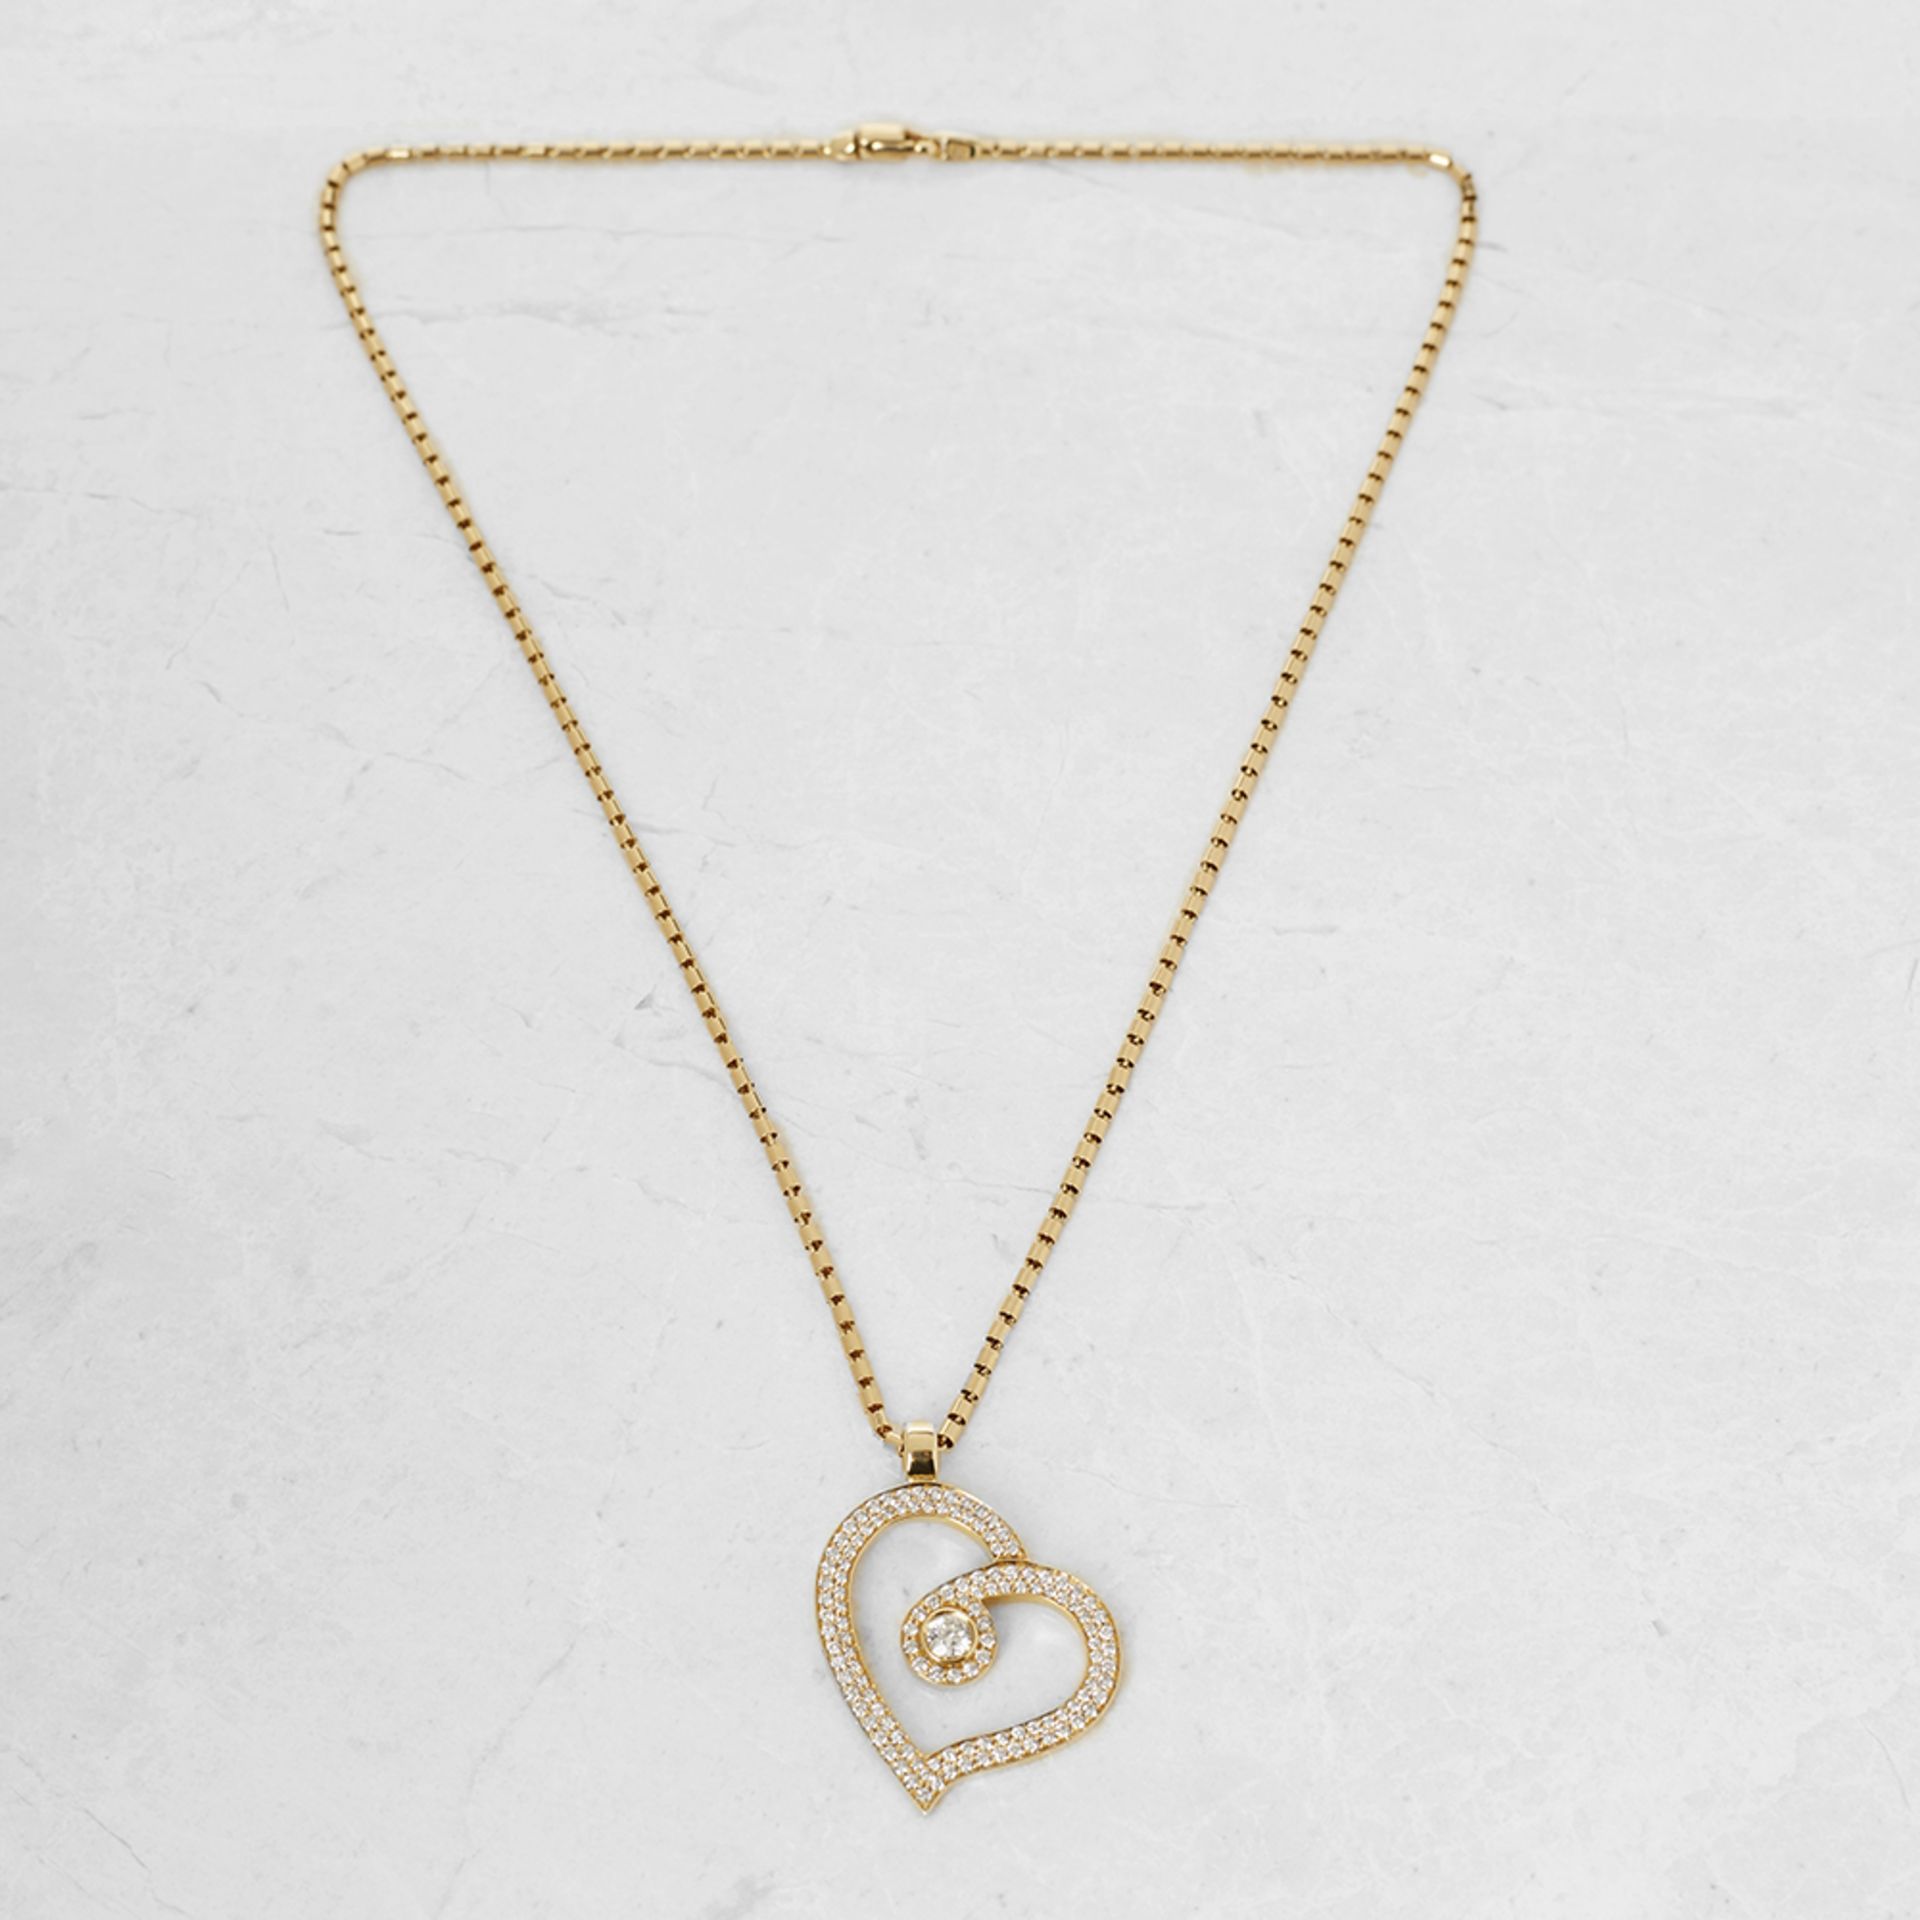 Roberto Coin 18k Yellow Gold Diamond Heart Necklace - Image 9 of 11